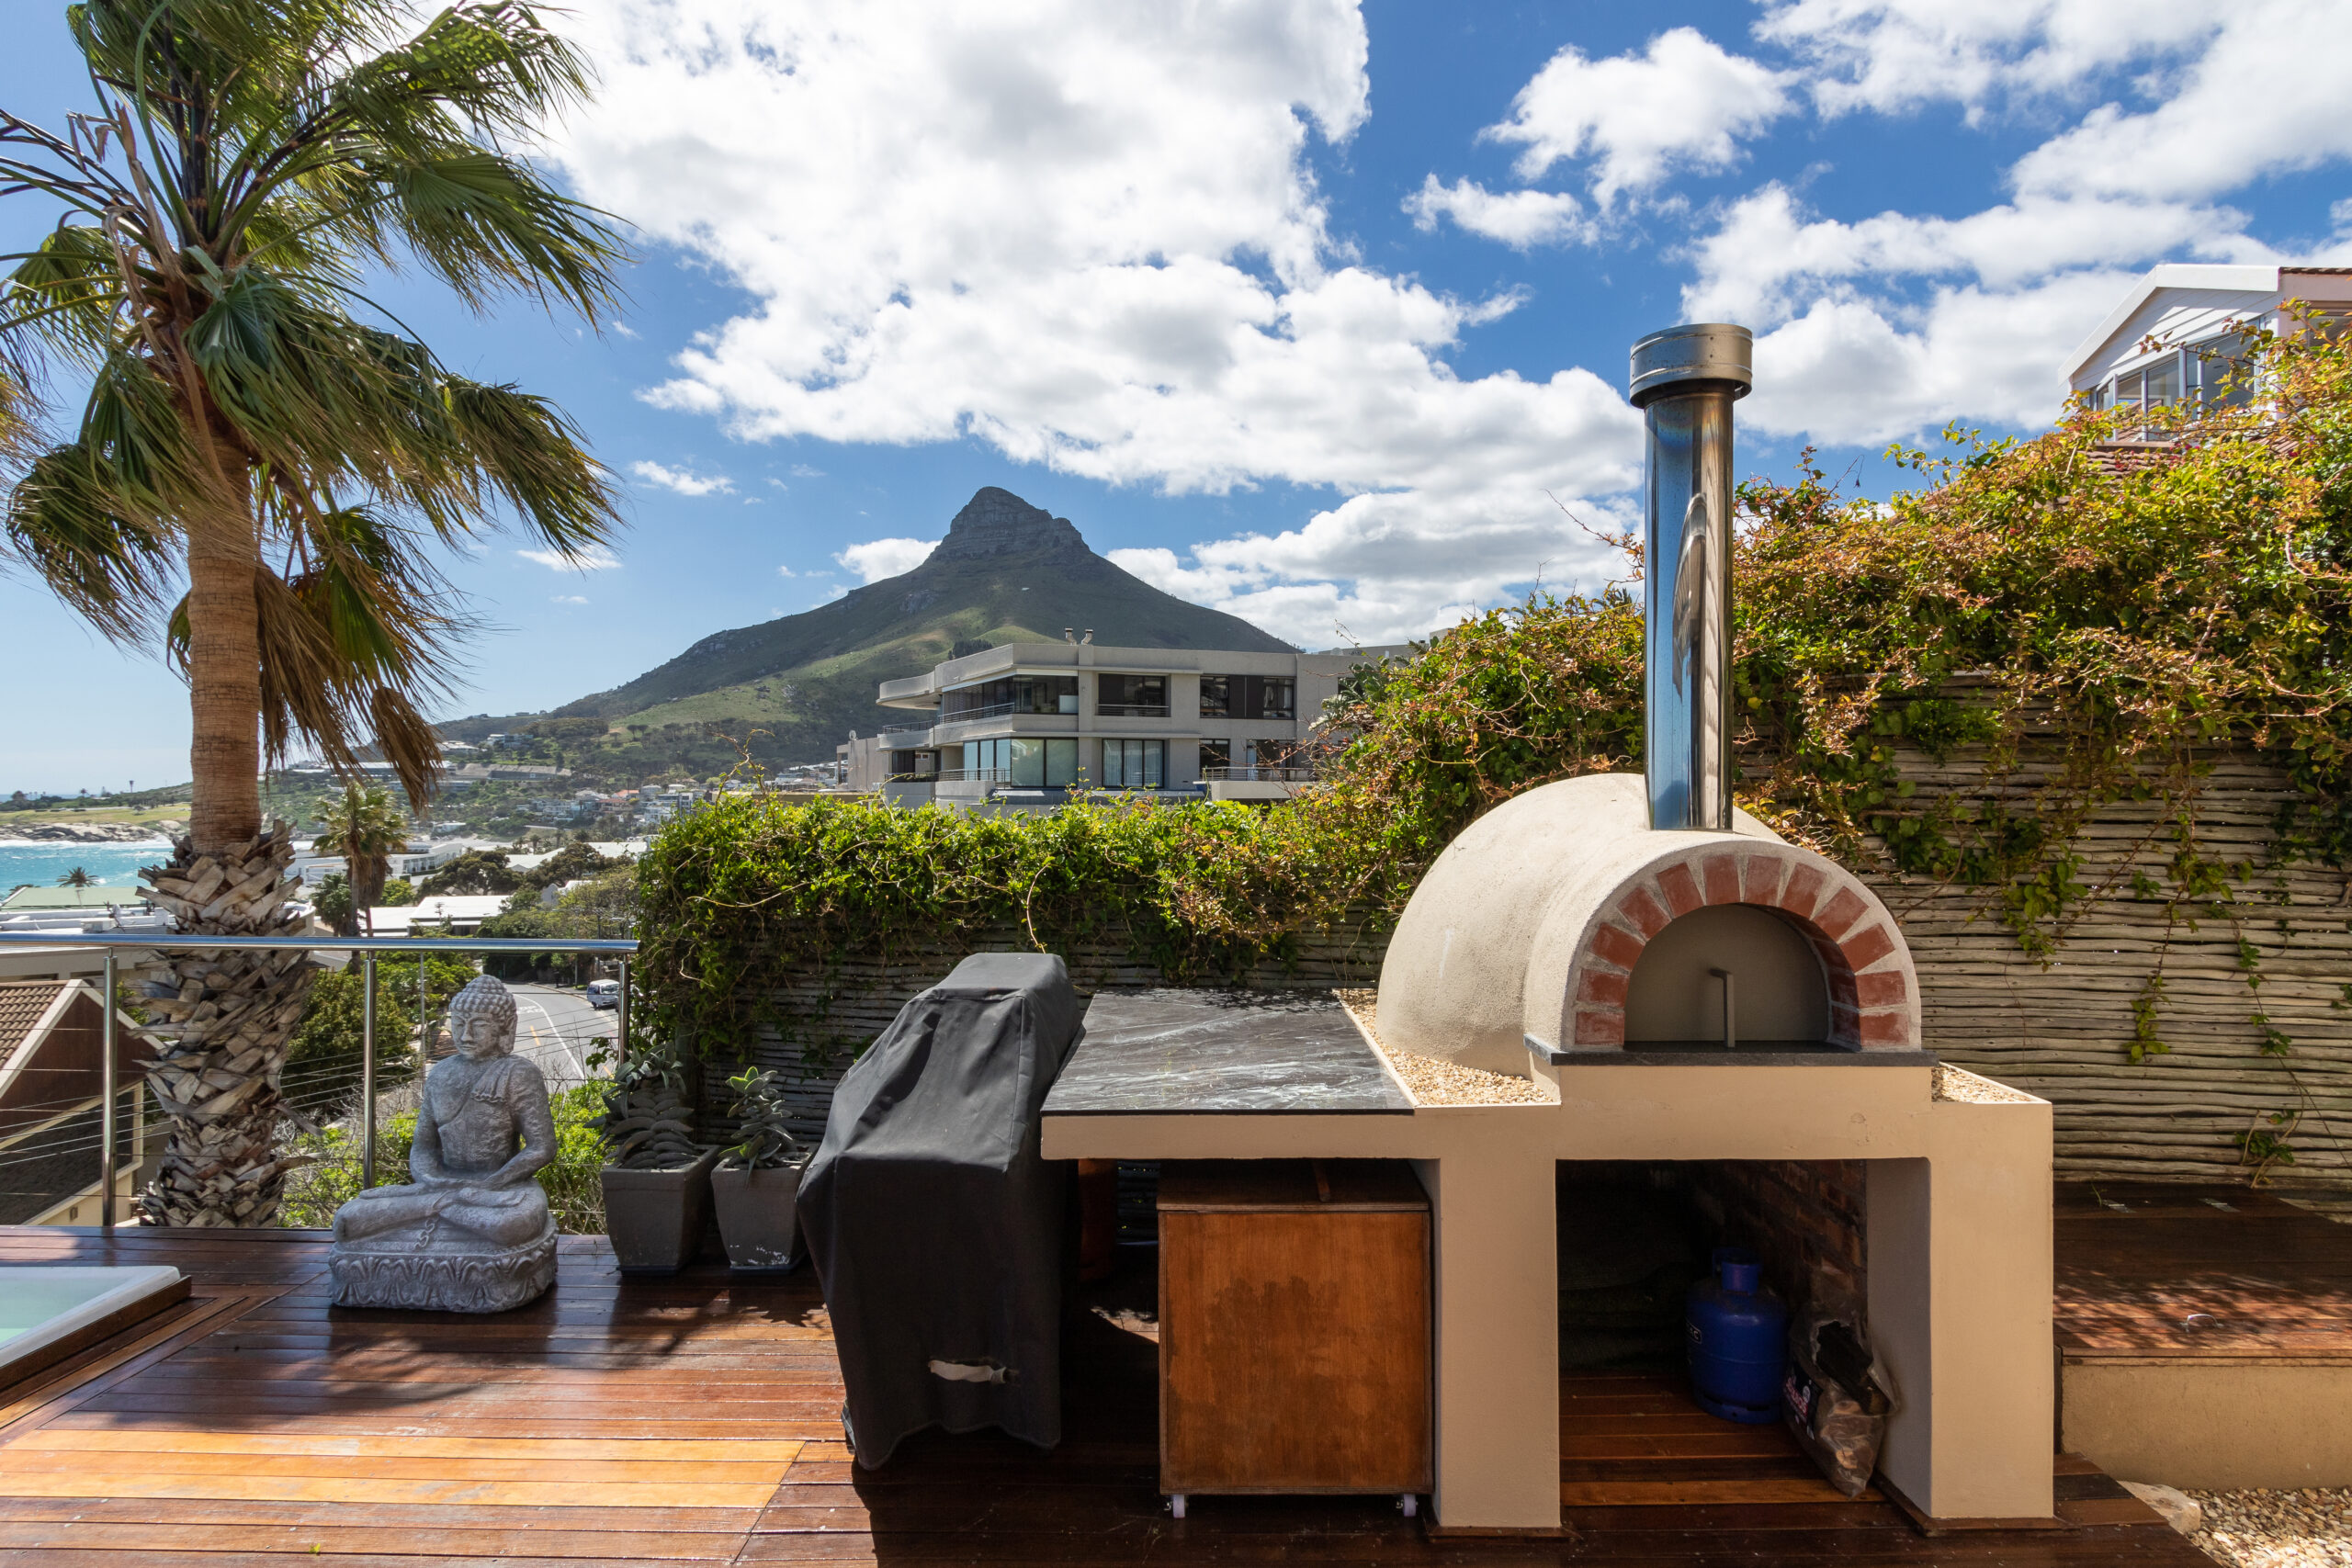 21. Pizza Oven & Bbq Grill Unit 1, A Camps Bay Drive, Camps Bay 31